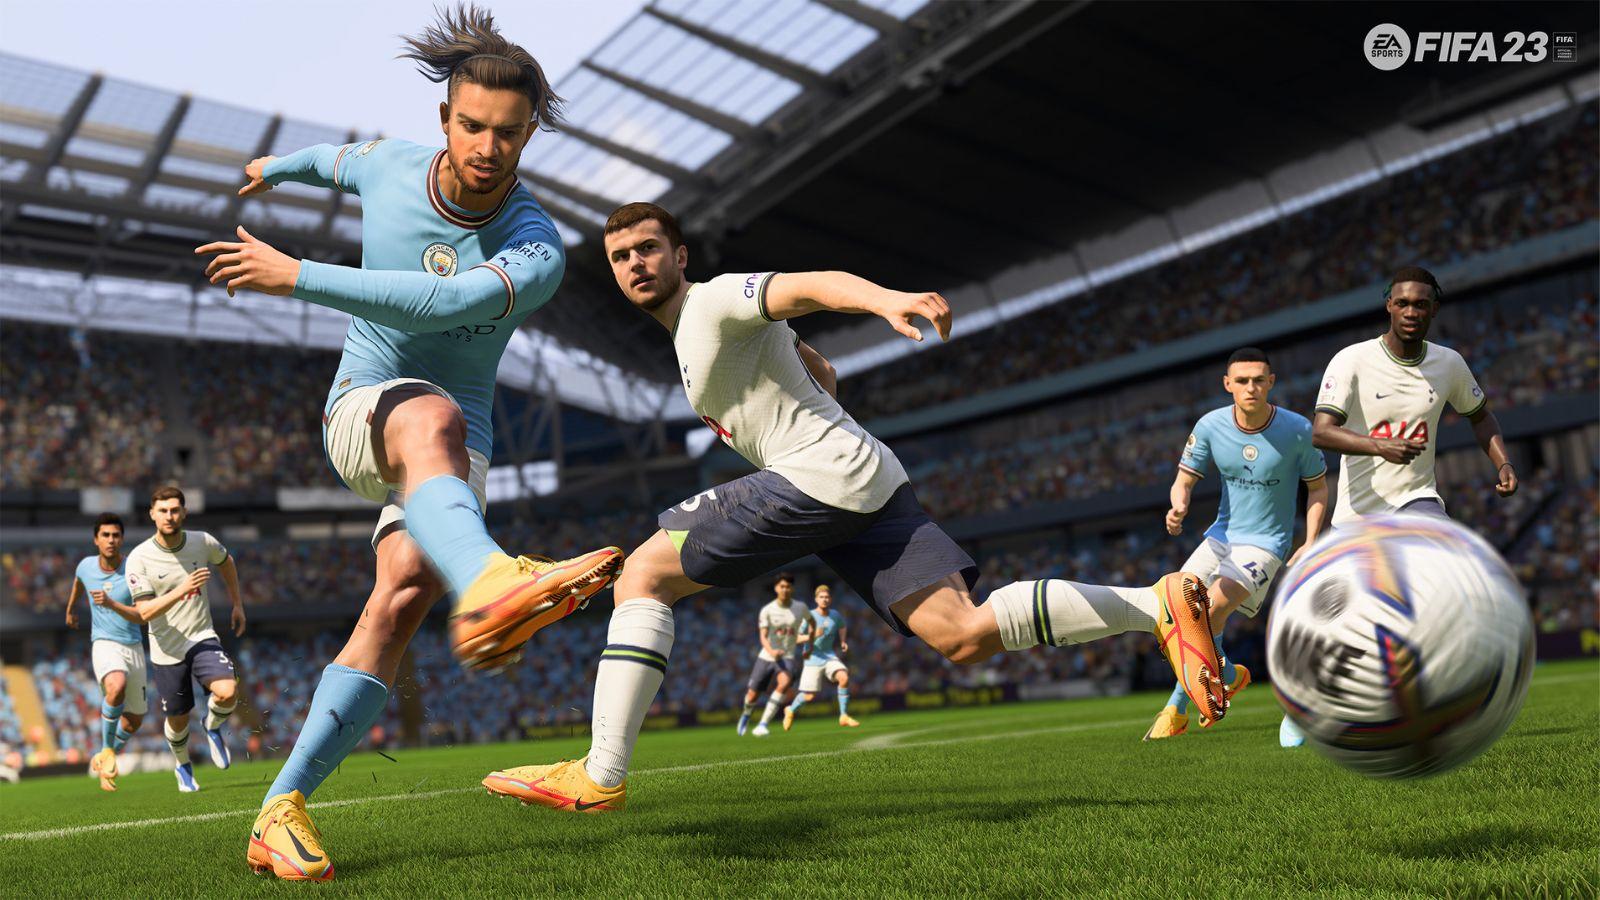 FIFA 23 crossplay and cross-platform play explained